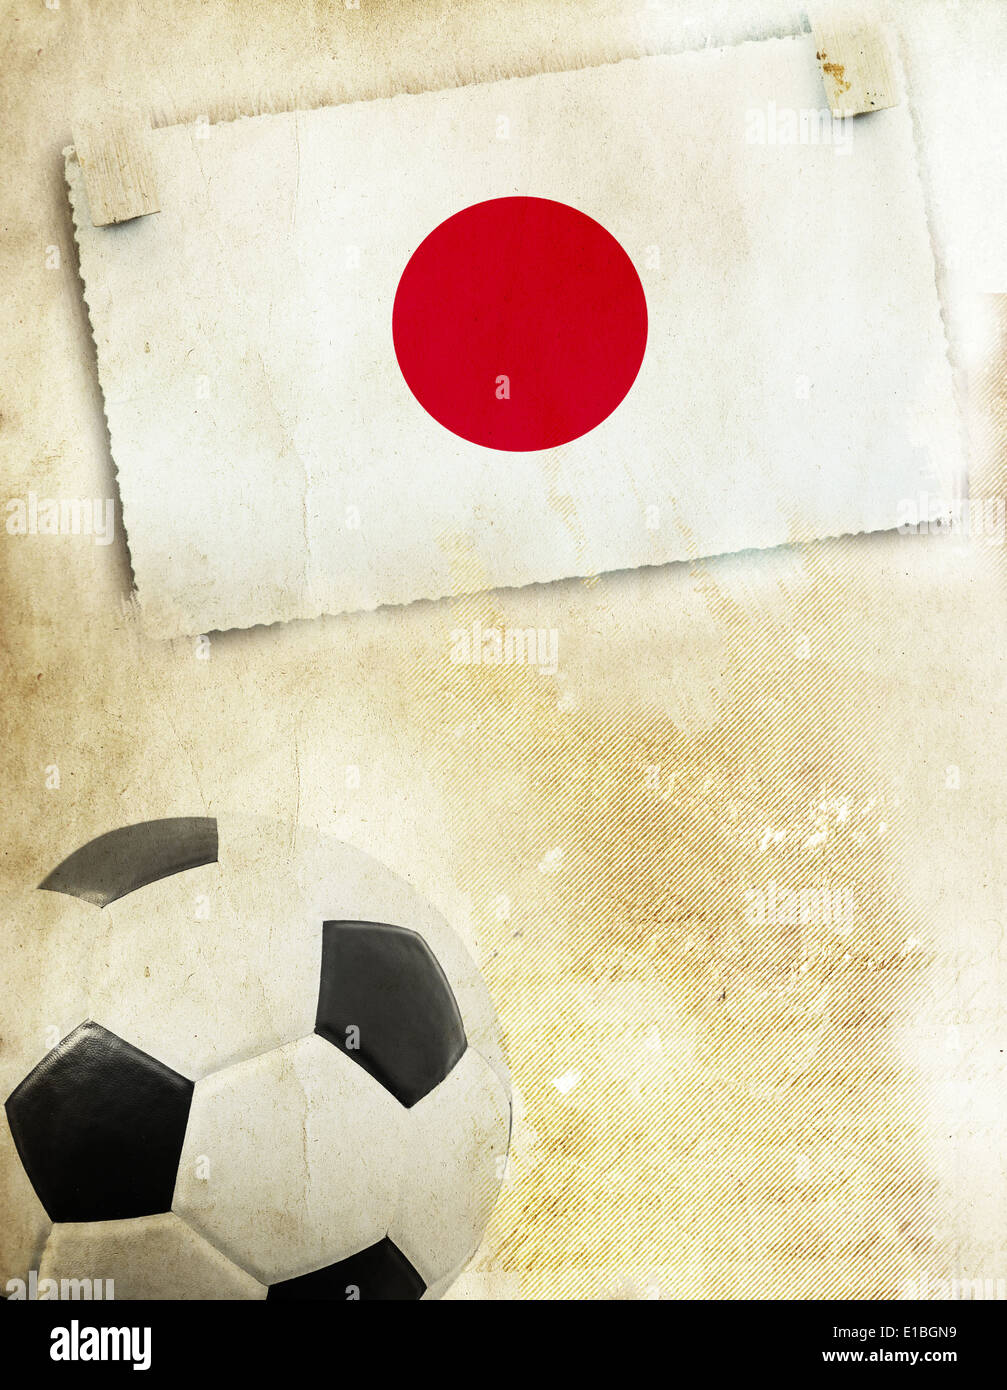 Vintage photo of Japan flag and soccer ball Stock Photo